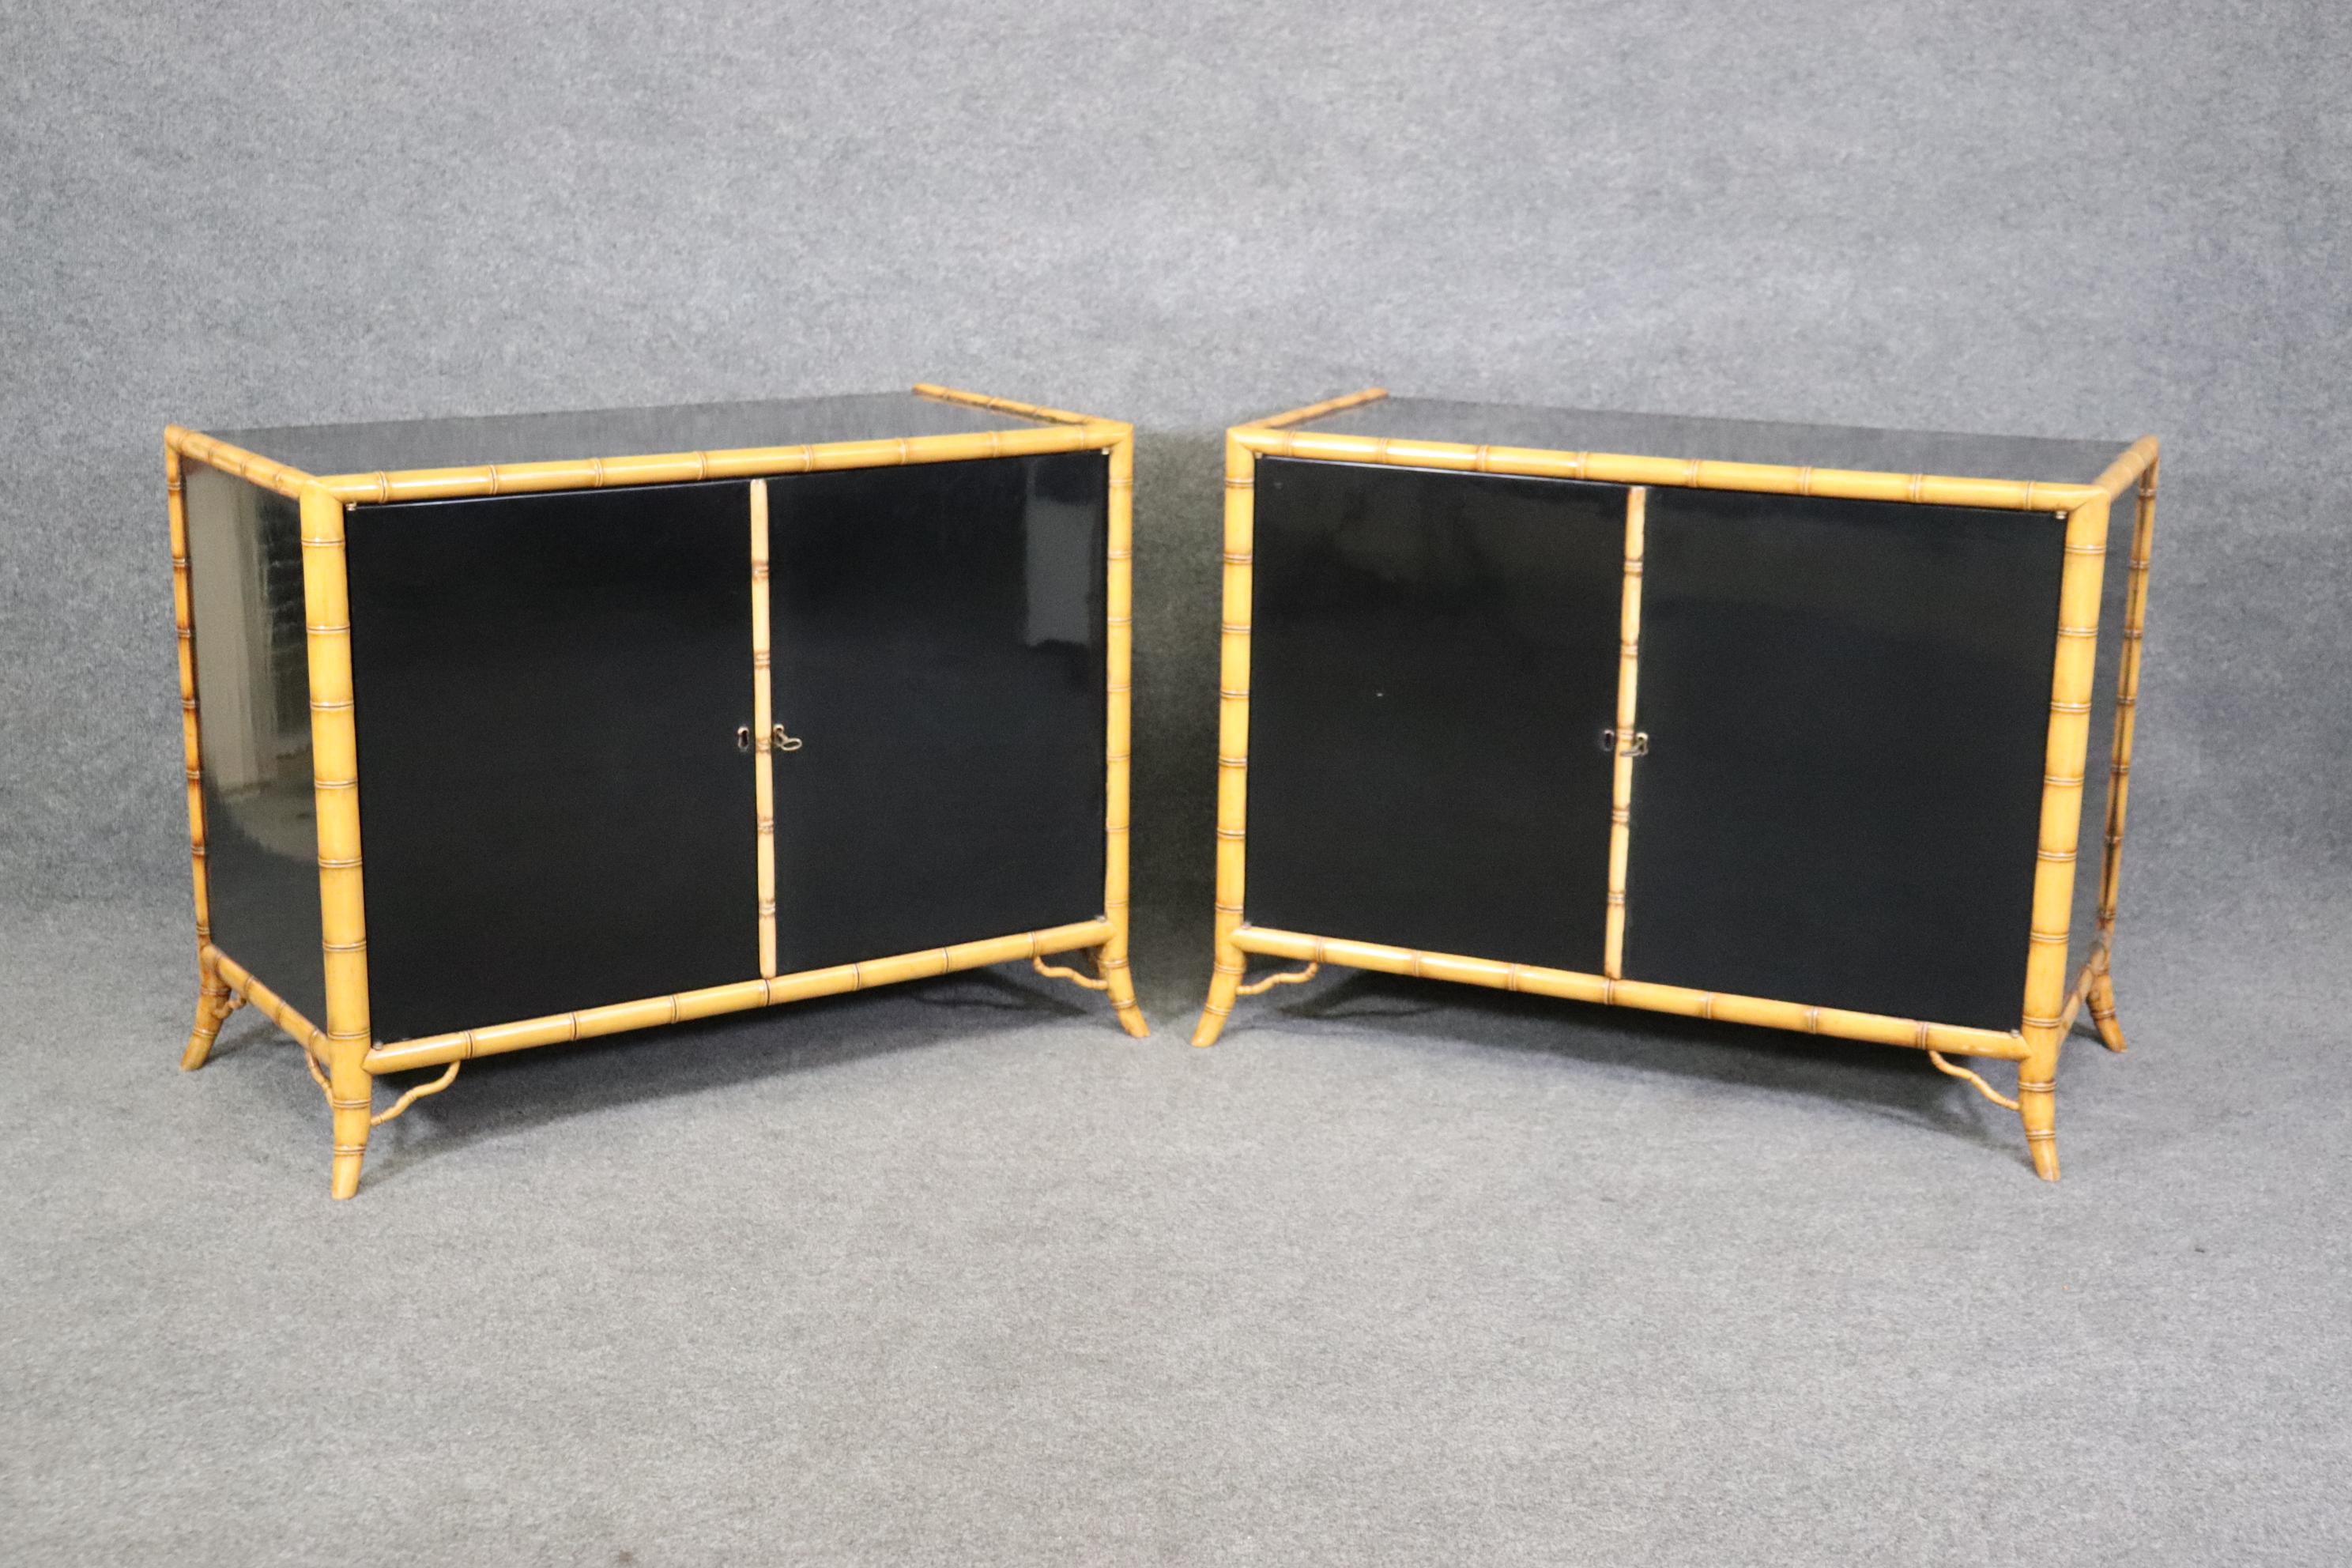 This is a stunning pair of faux bamboo commodes done in a natural looking faux bamboo with polished black lacquer tops and sides. The construction quality of Burton-Ching items are ALWAYS top notch and no expense is spared to make them look 